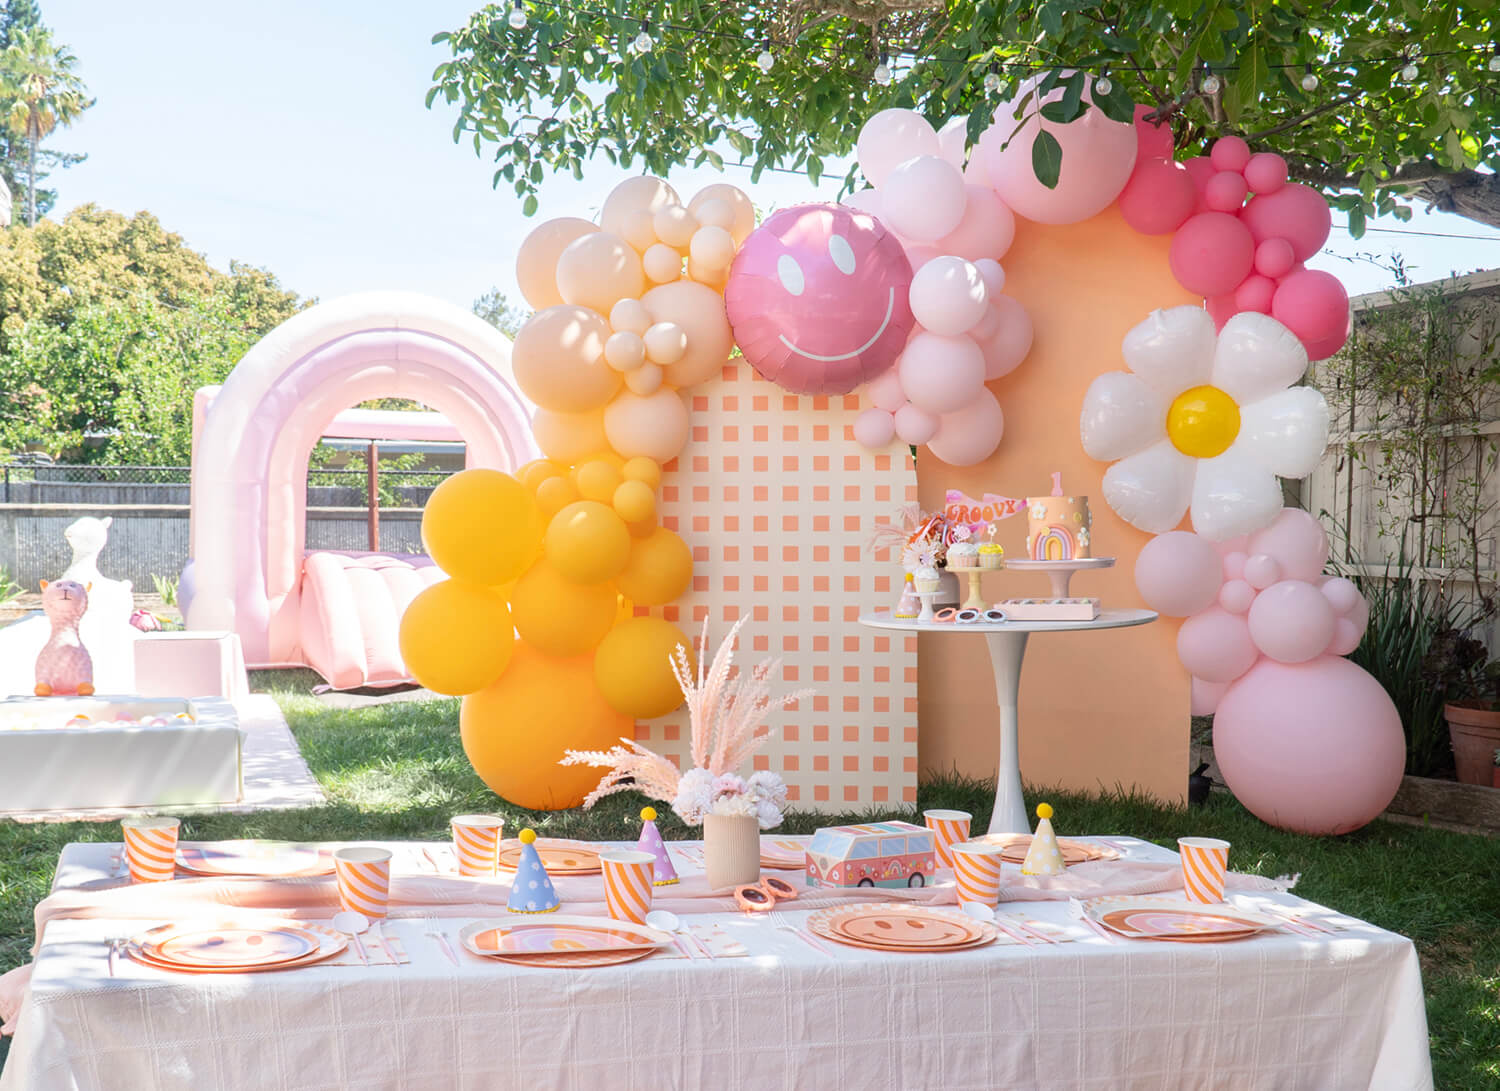 Groovy One” Girl's First Birthday Party Ideas